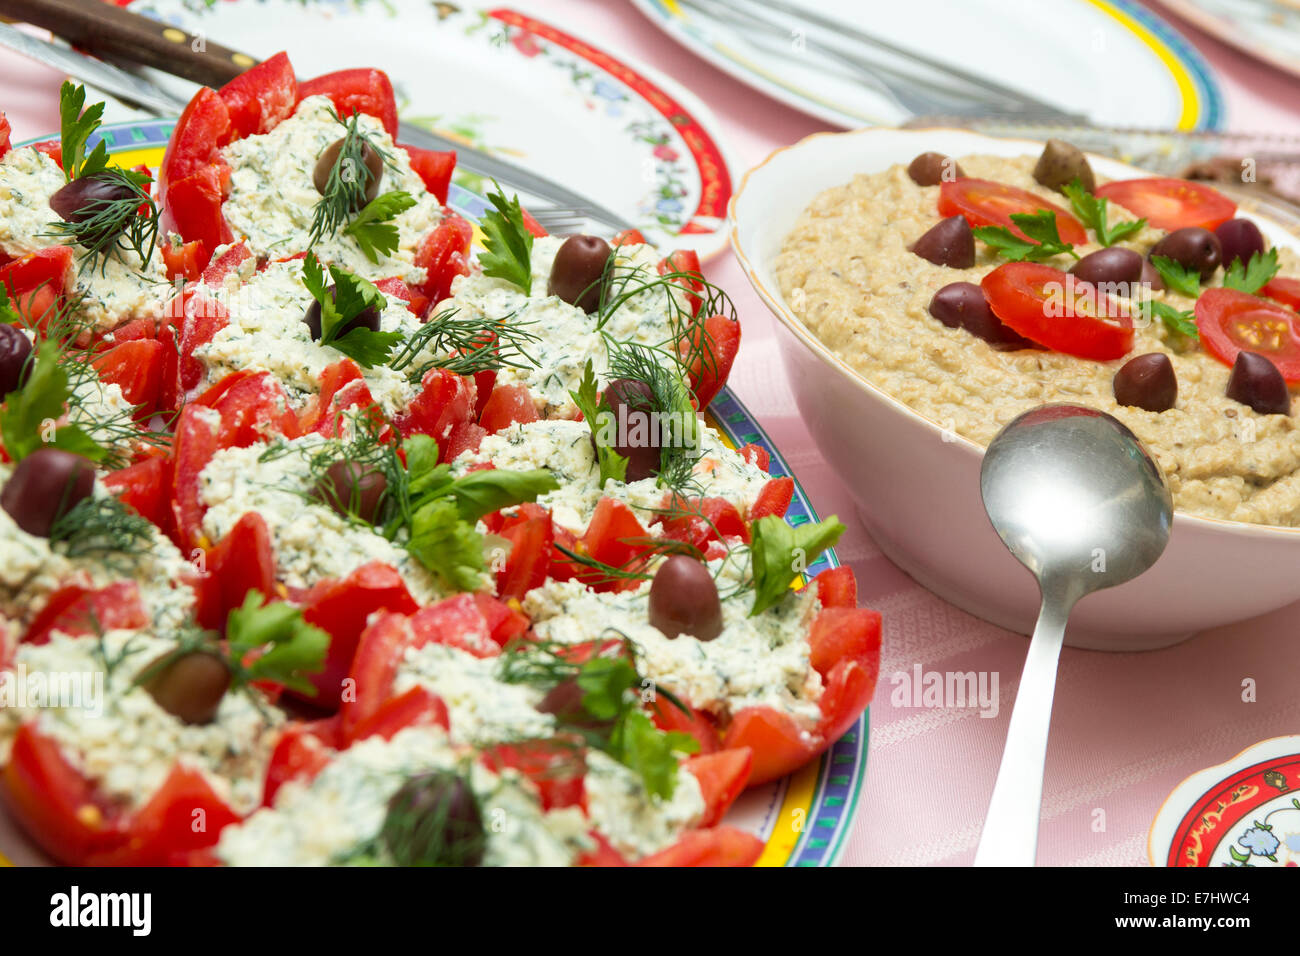 Stuffed tomatoes with cheese and eggplant salad on table Stock Photo